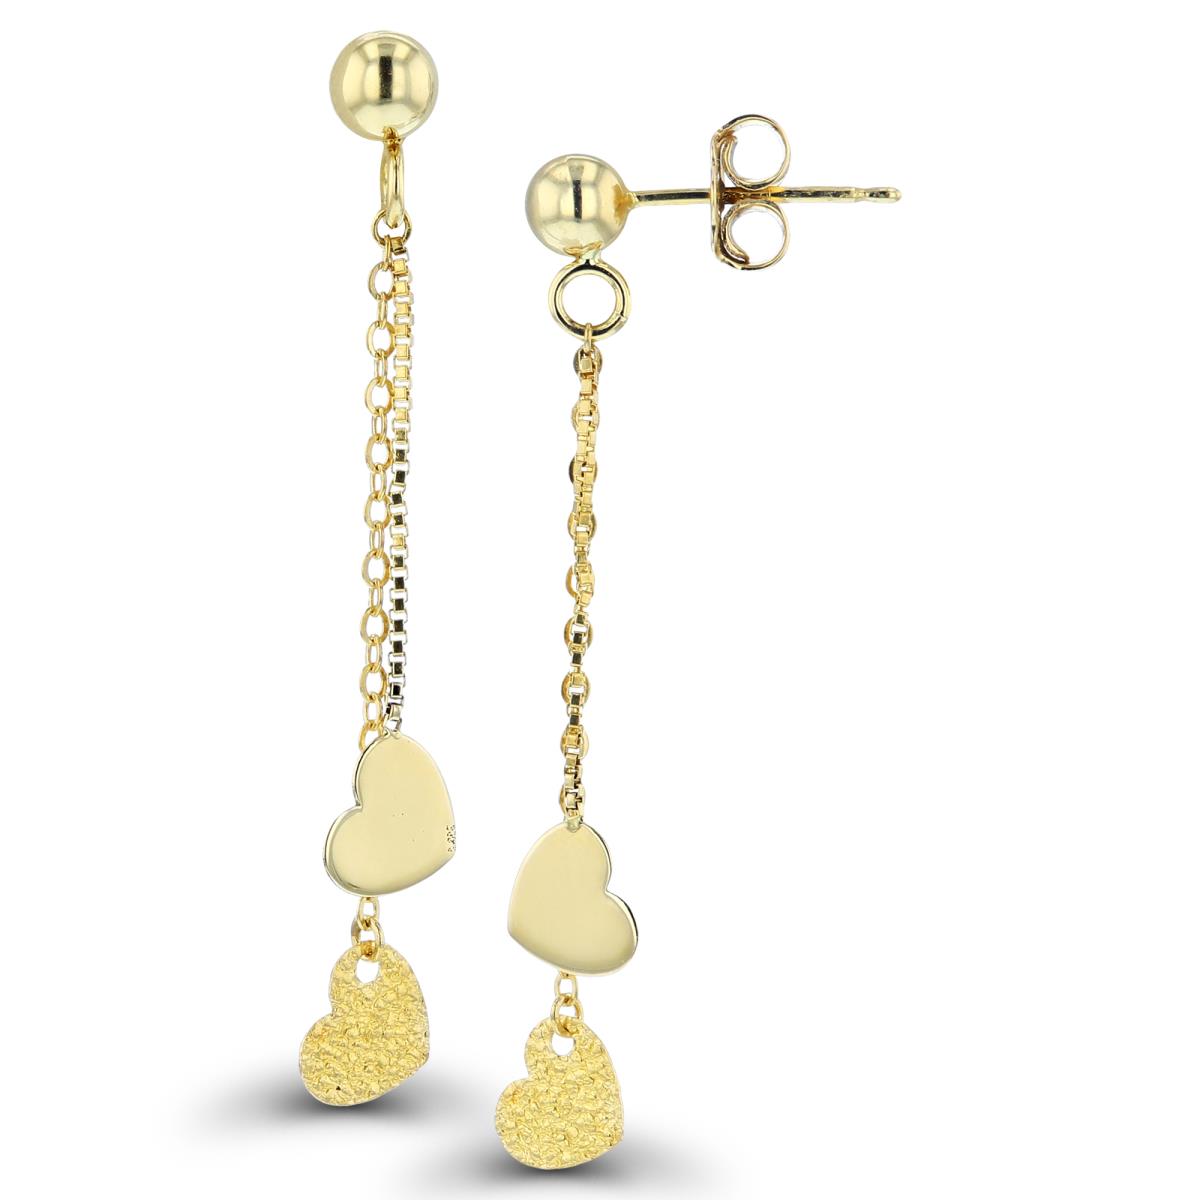 14K Yellow Gold High Polish & Textured Hearts Dangling on Spools Earrings